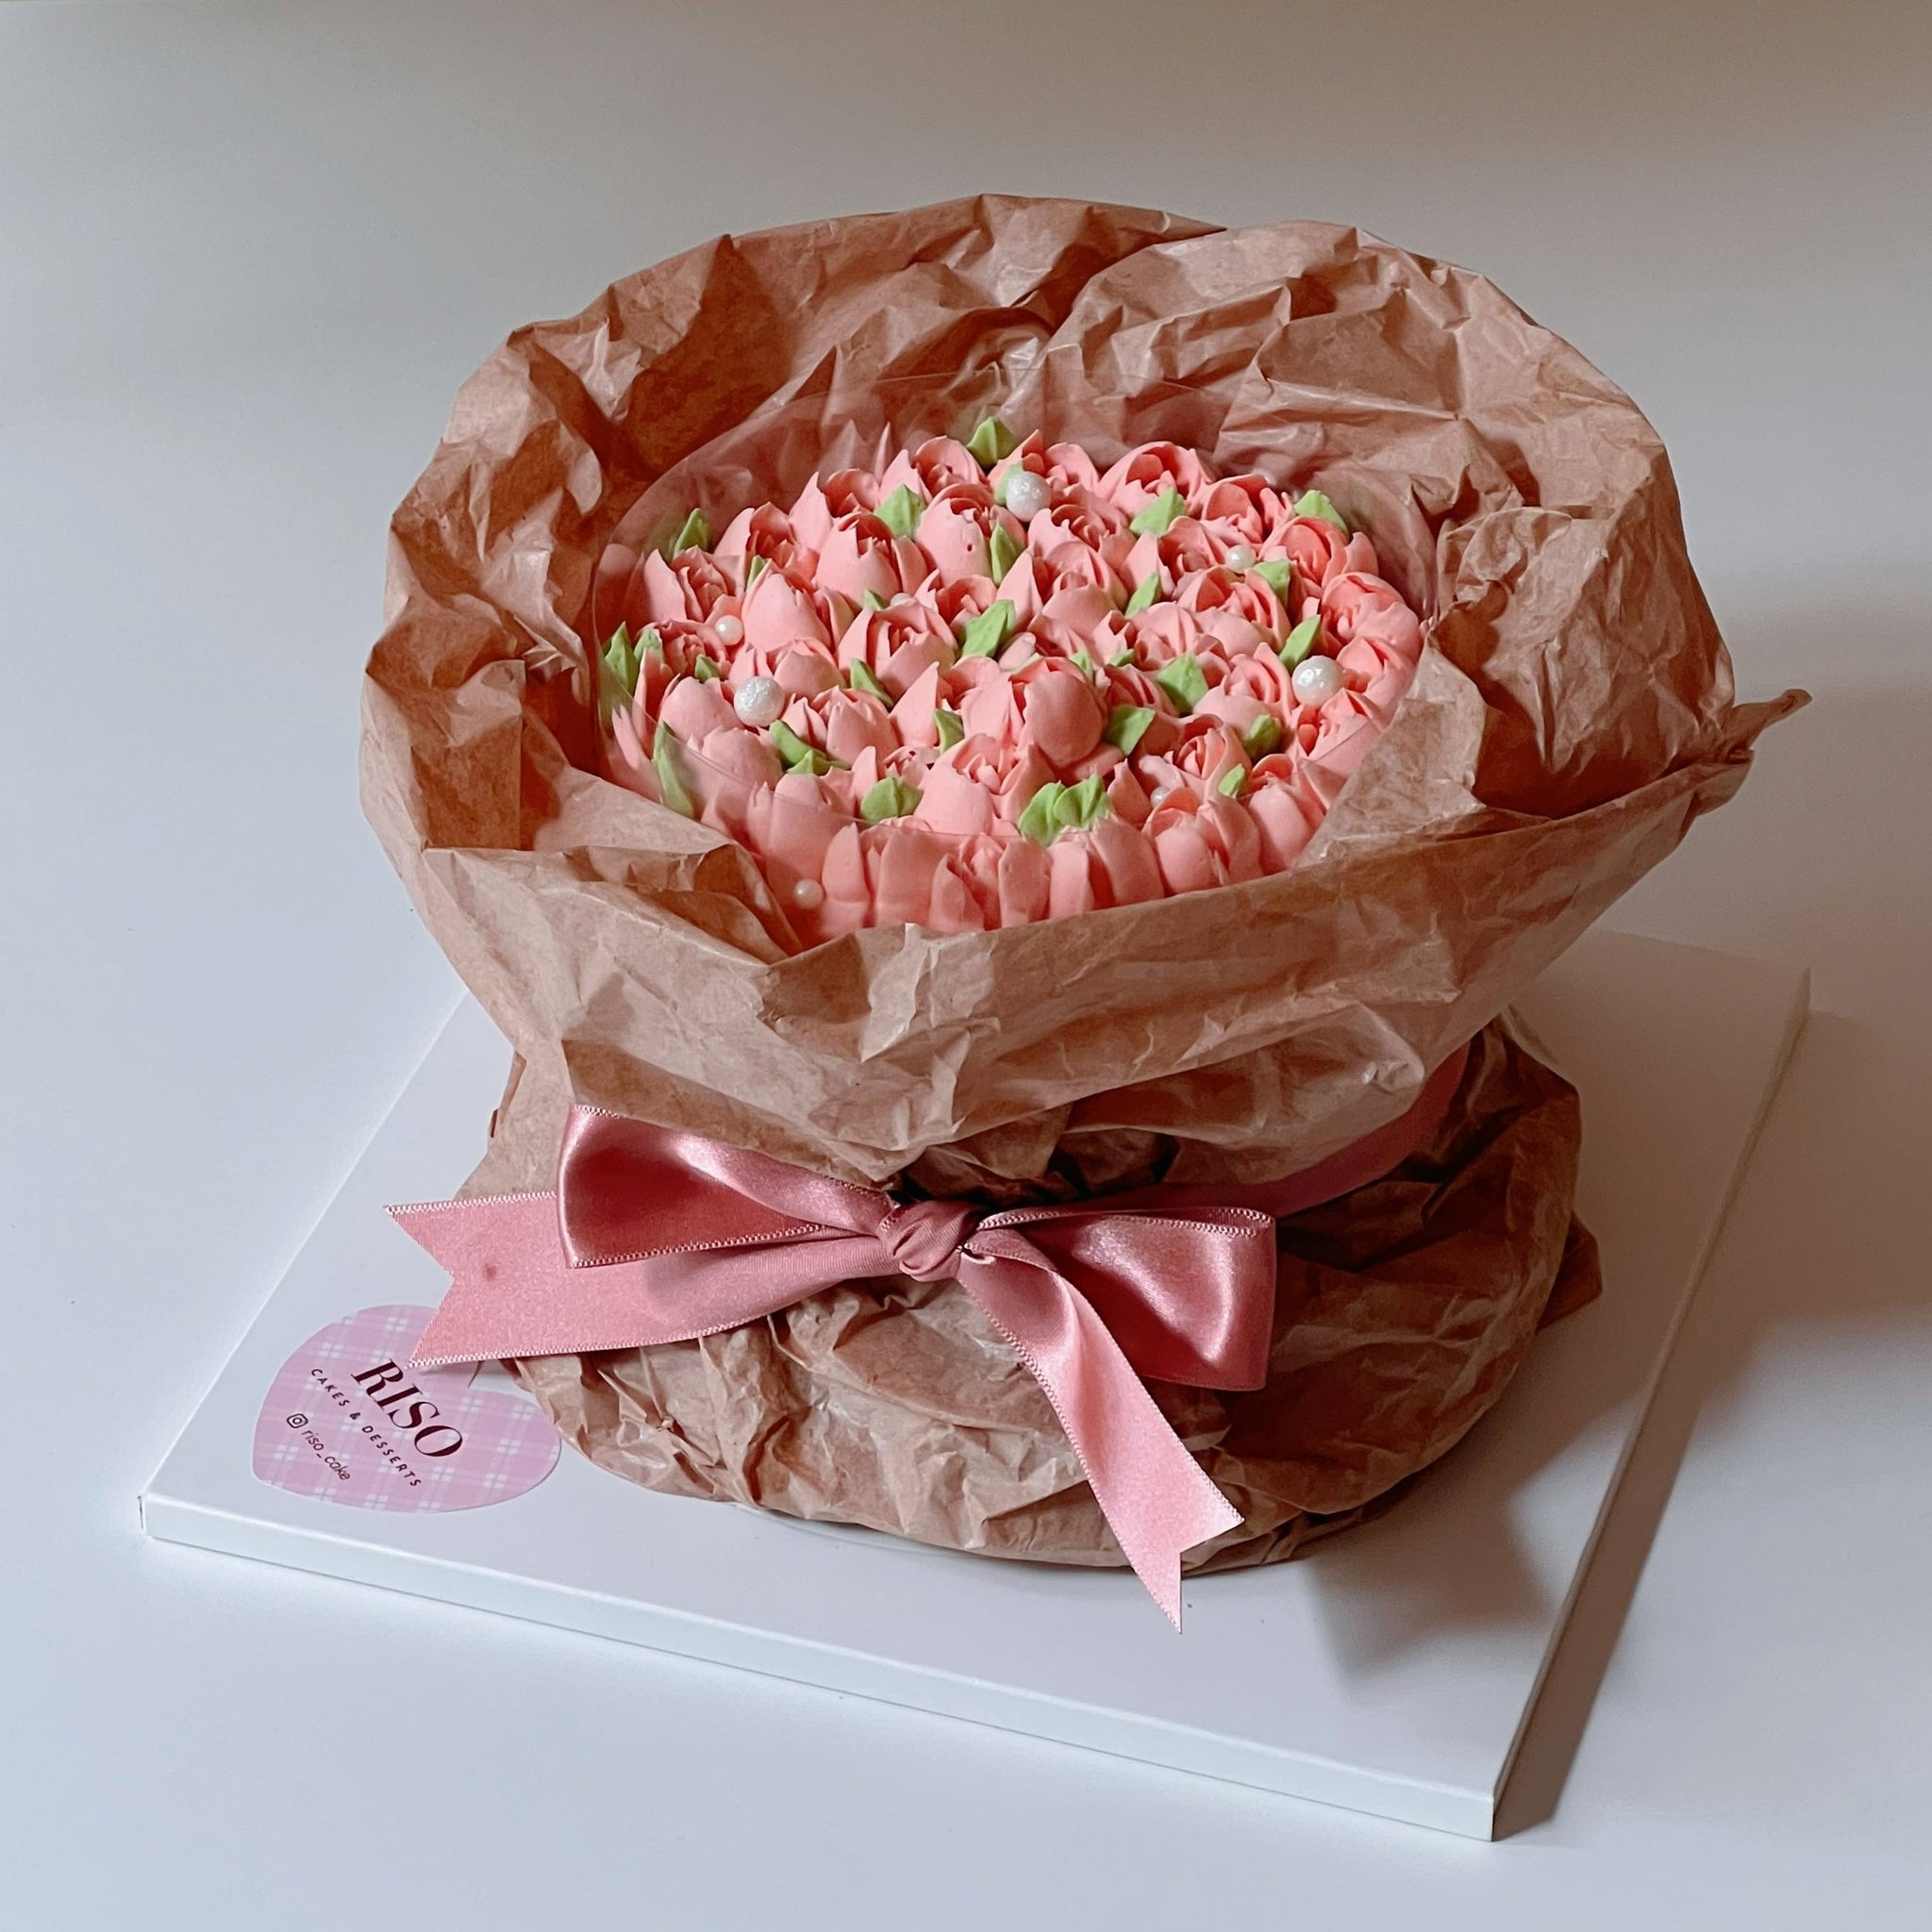 Spring Bouquet - Pastries by Randolph